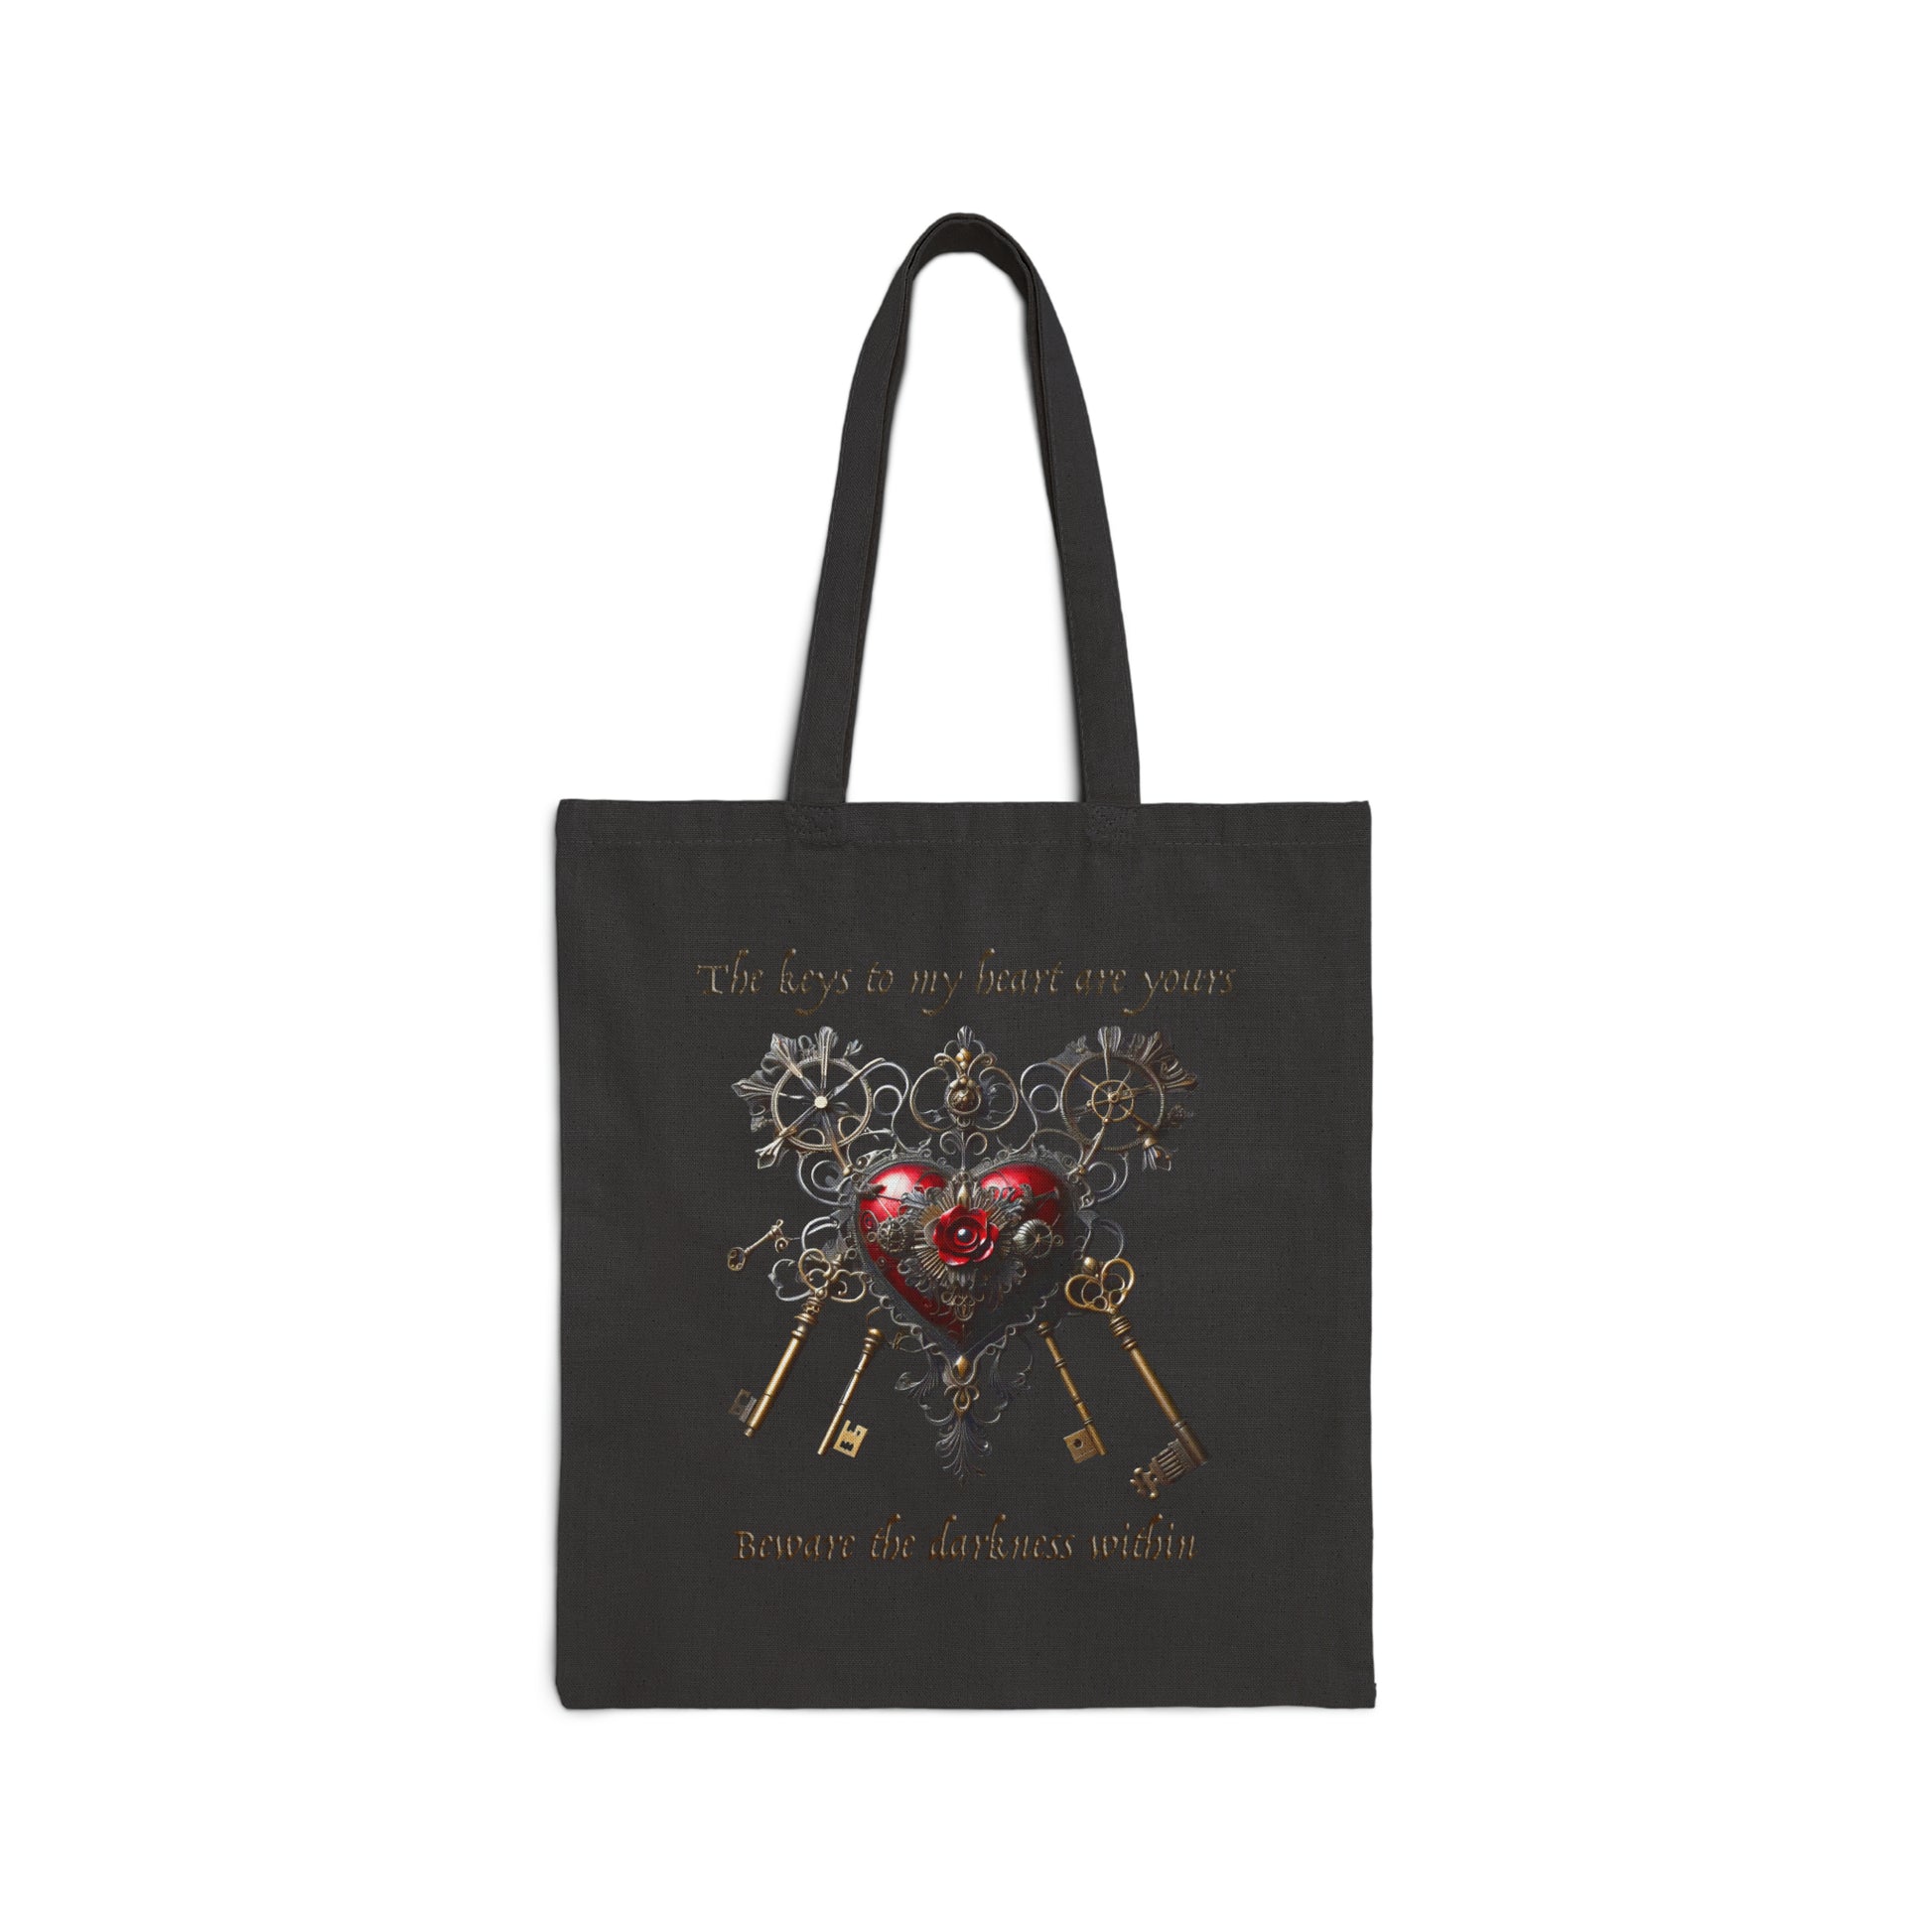 Beware the Darkness Within Black Tote Bags from Generation Mood